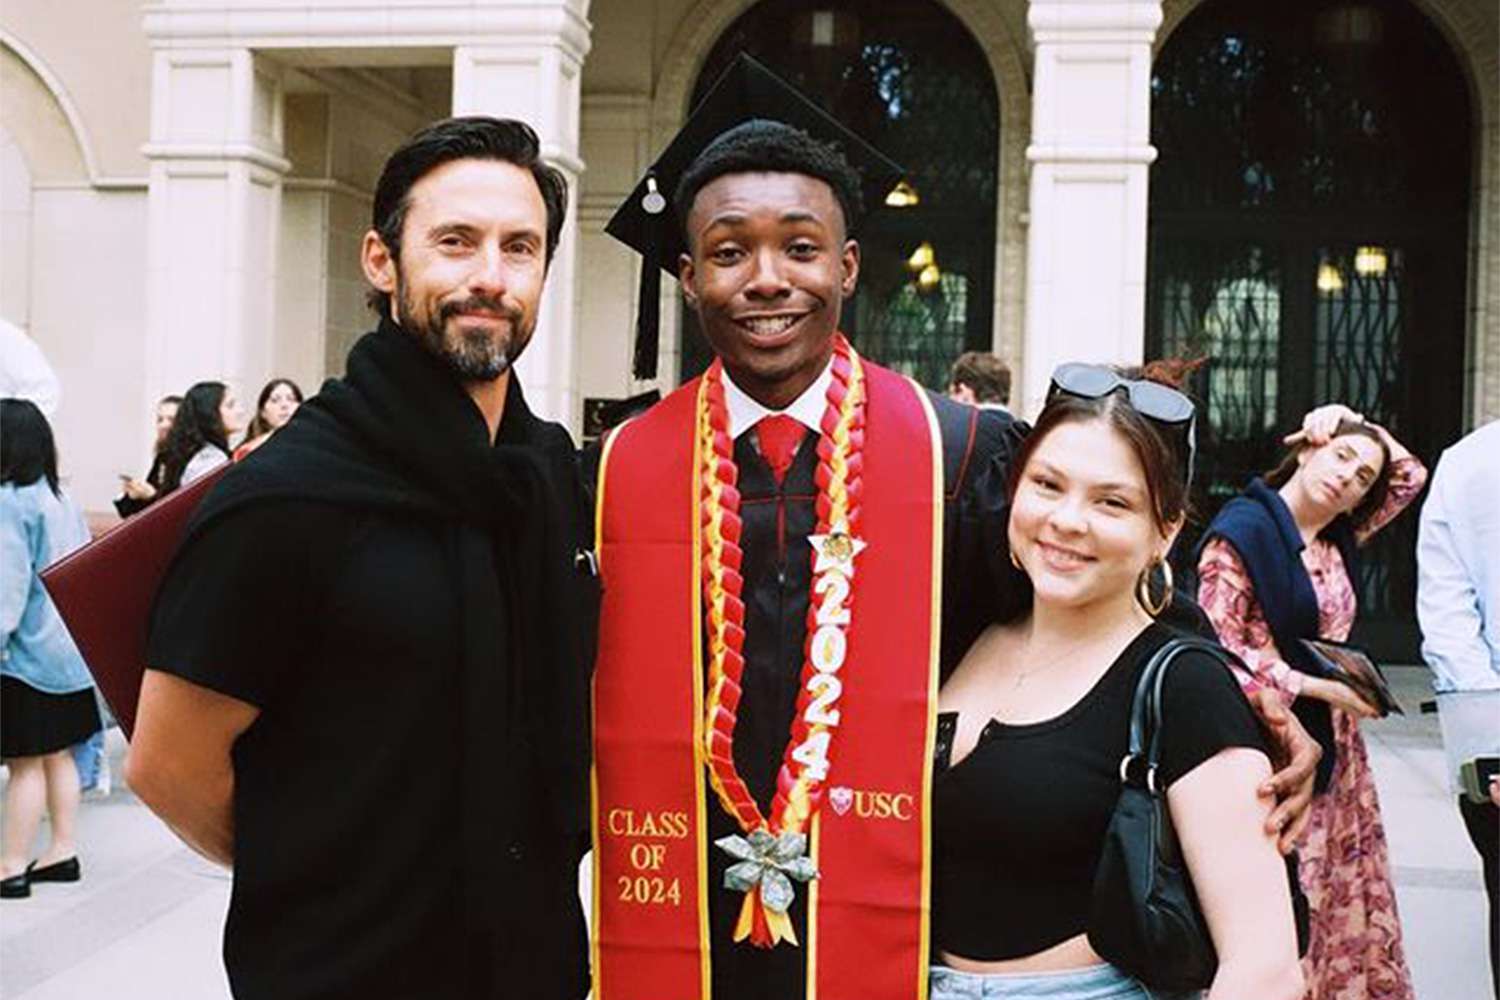 Milo Ventimiglia reunites with his 'This Is Us' kids for Niles Fitch’s graduation